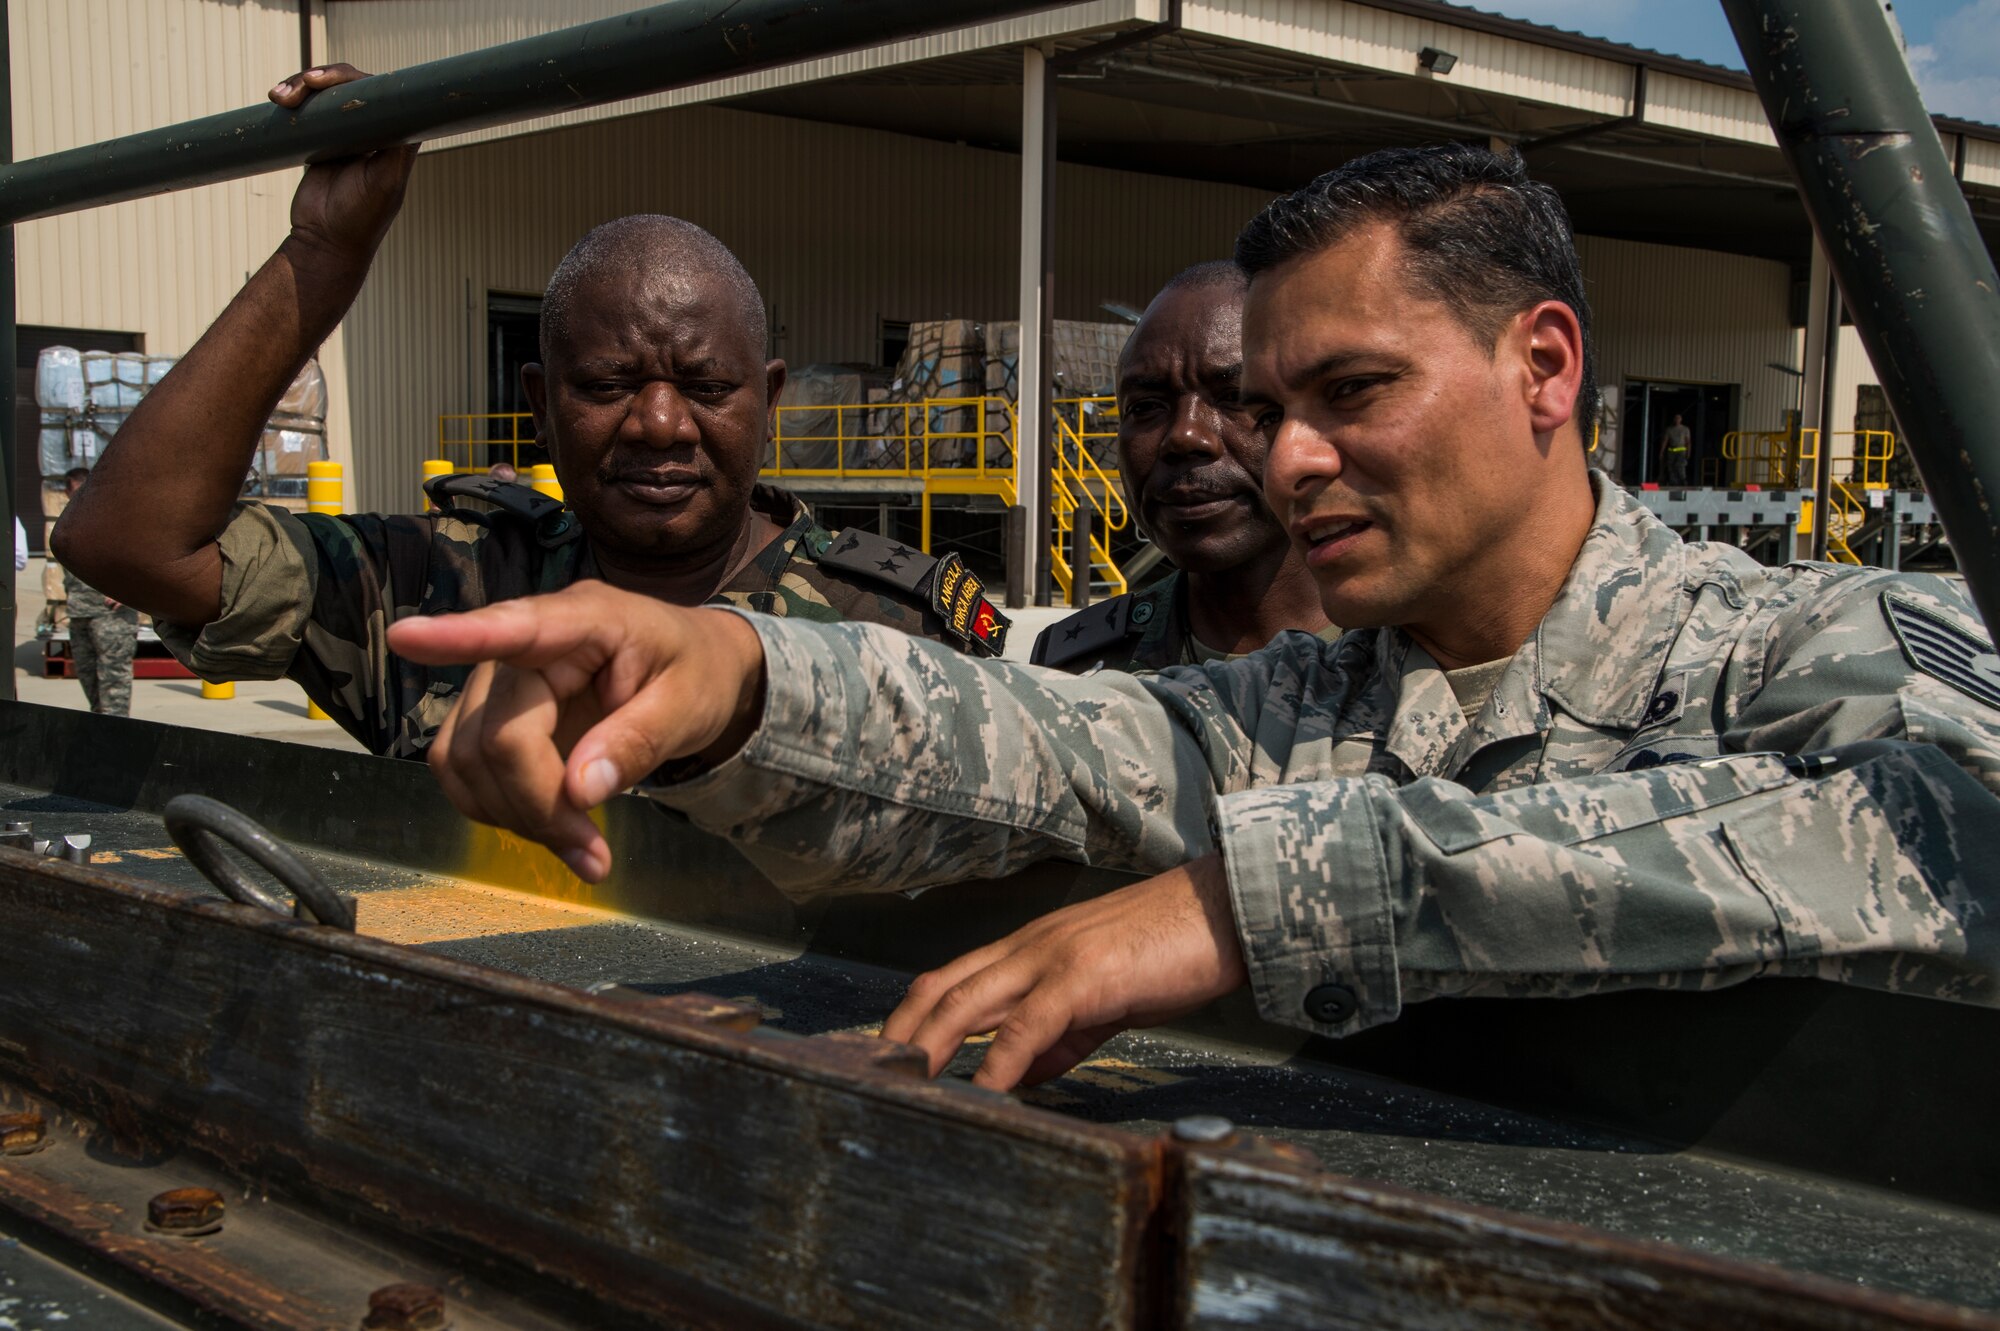 Tech. Sgt. Manuel Chavez, right, an air advisor assigned to the 818th Mobility Support Advisory Squadron, shares knowledge about the Halvorsen K Loader to members of the Angolan Air Force during the African Partnership Flight hosted by the 621st Contingency Response Wing at Joint Base McGuire-Dix-Lakehurst, N.J., Sept. 1, 2015. The African Partnership Flight program, sponsored and developed by U.S. Air Forces in Europe and Air Forces Africa, is the premier security cooperation program that partners U.S. and African personnel to improve professional military aviation knowledge, skills and cooperation. (U.S. Air Force photo by Staff Sgt. Gustavo Gonzalez)